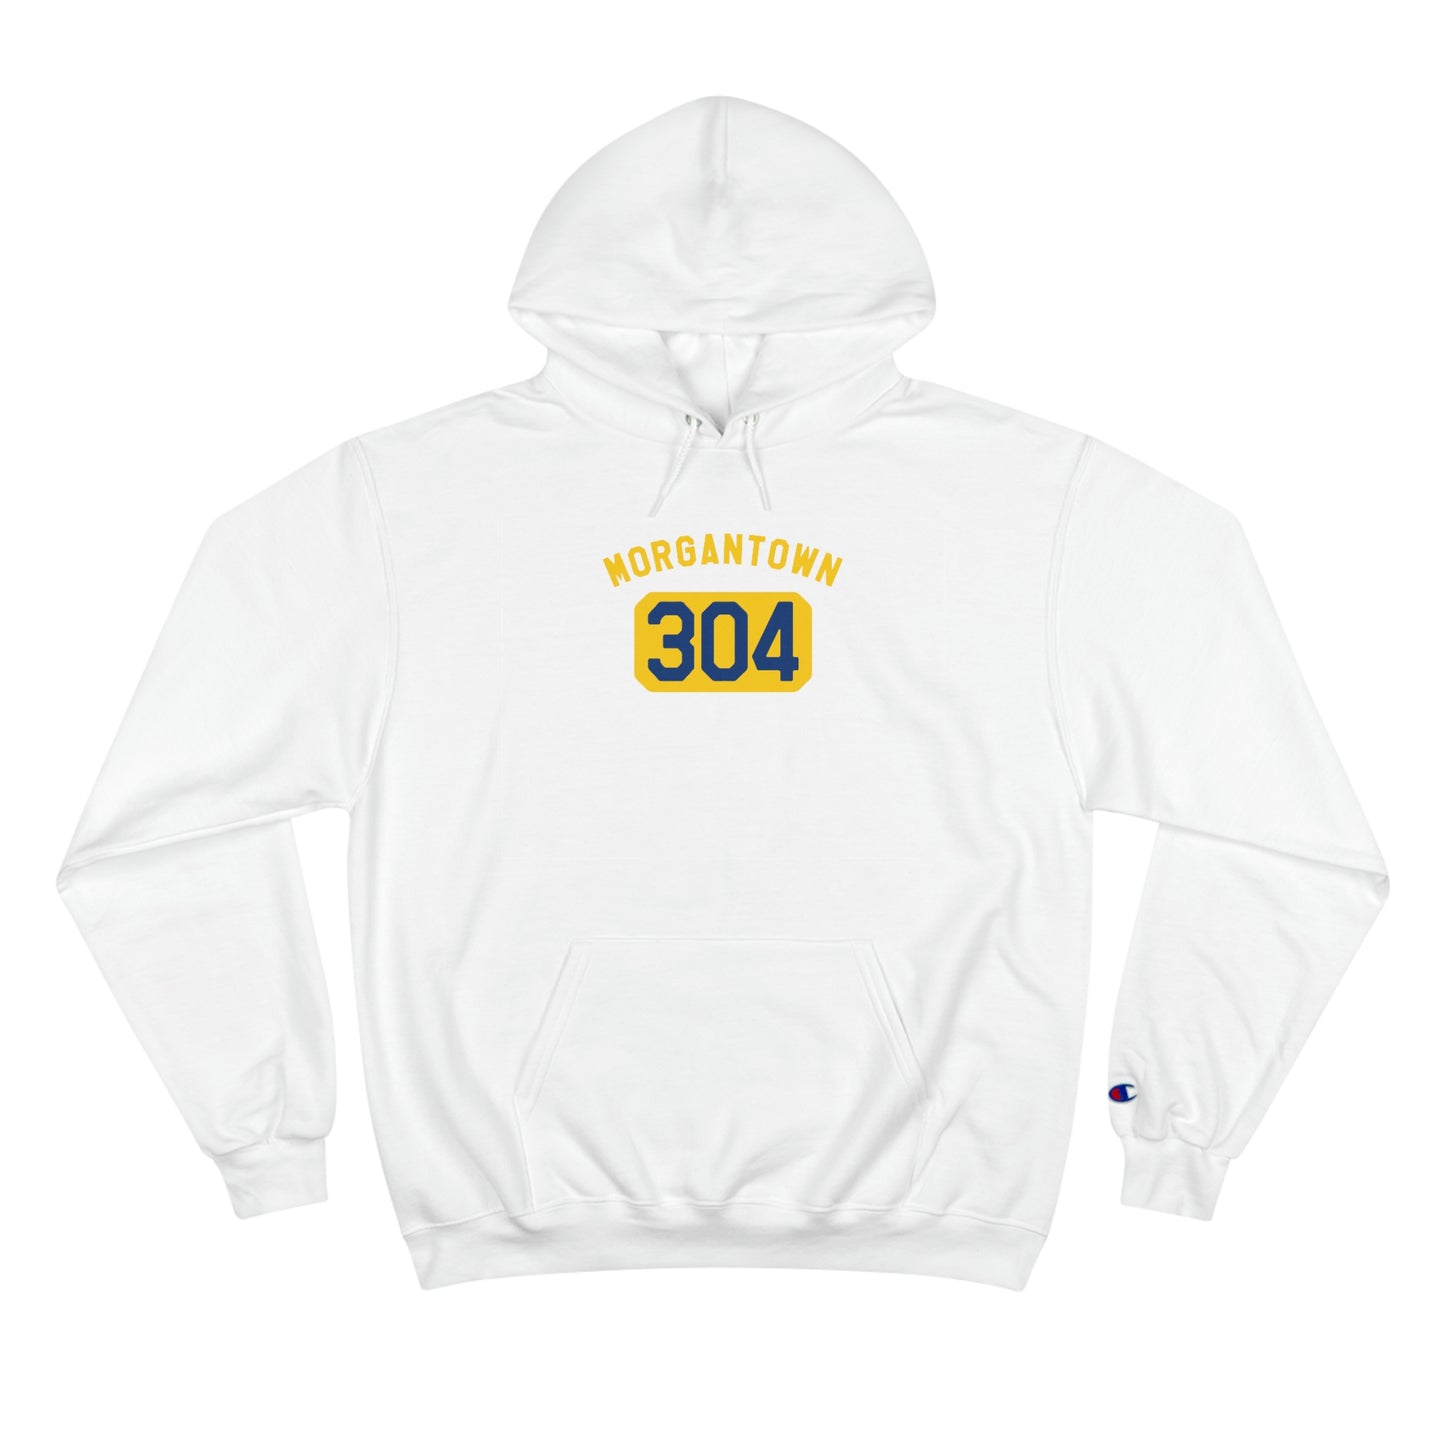 MORGANTOWN arched_304-Champion Hoodie